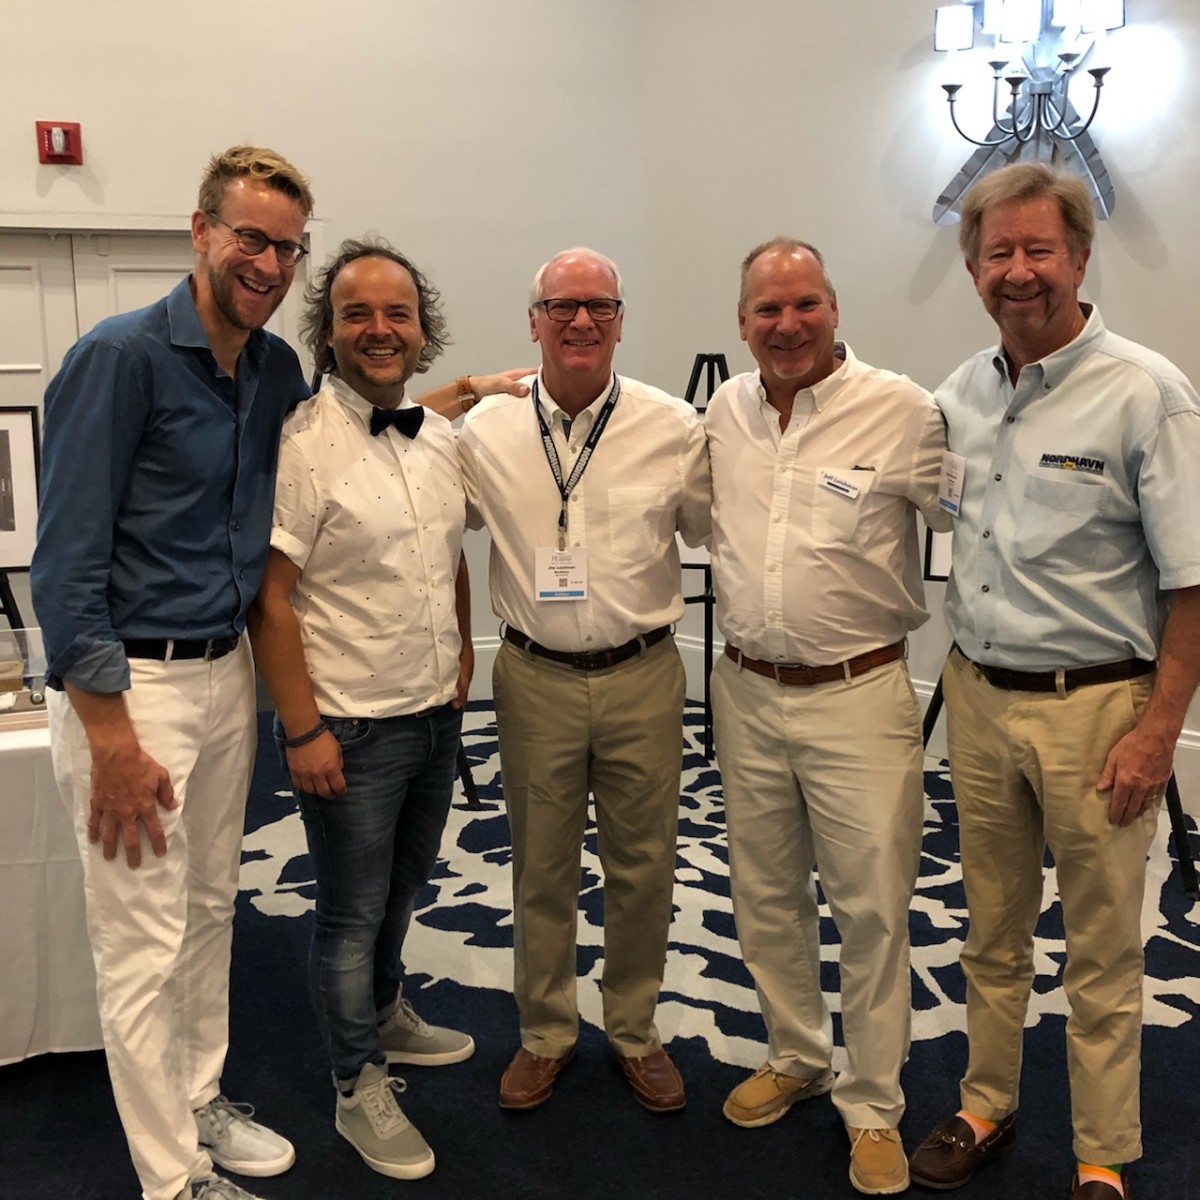 From left to right: Vripack's Bart Bouwhuis and Marnix Hoekstra; Nordhavn's Jim Leishman, Dan Leishman, and Dan Streetch.